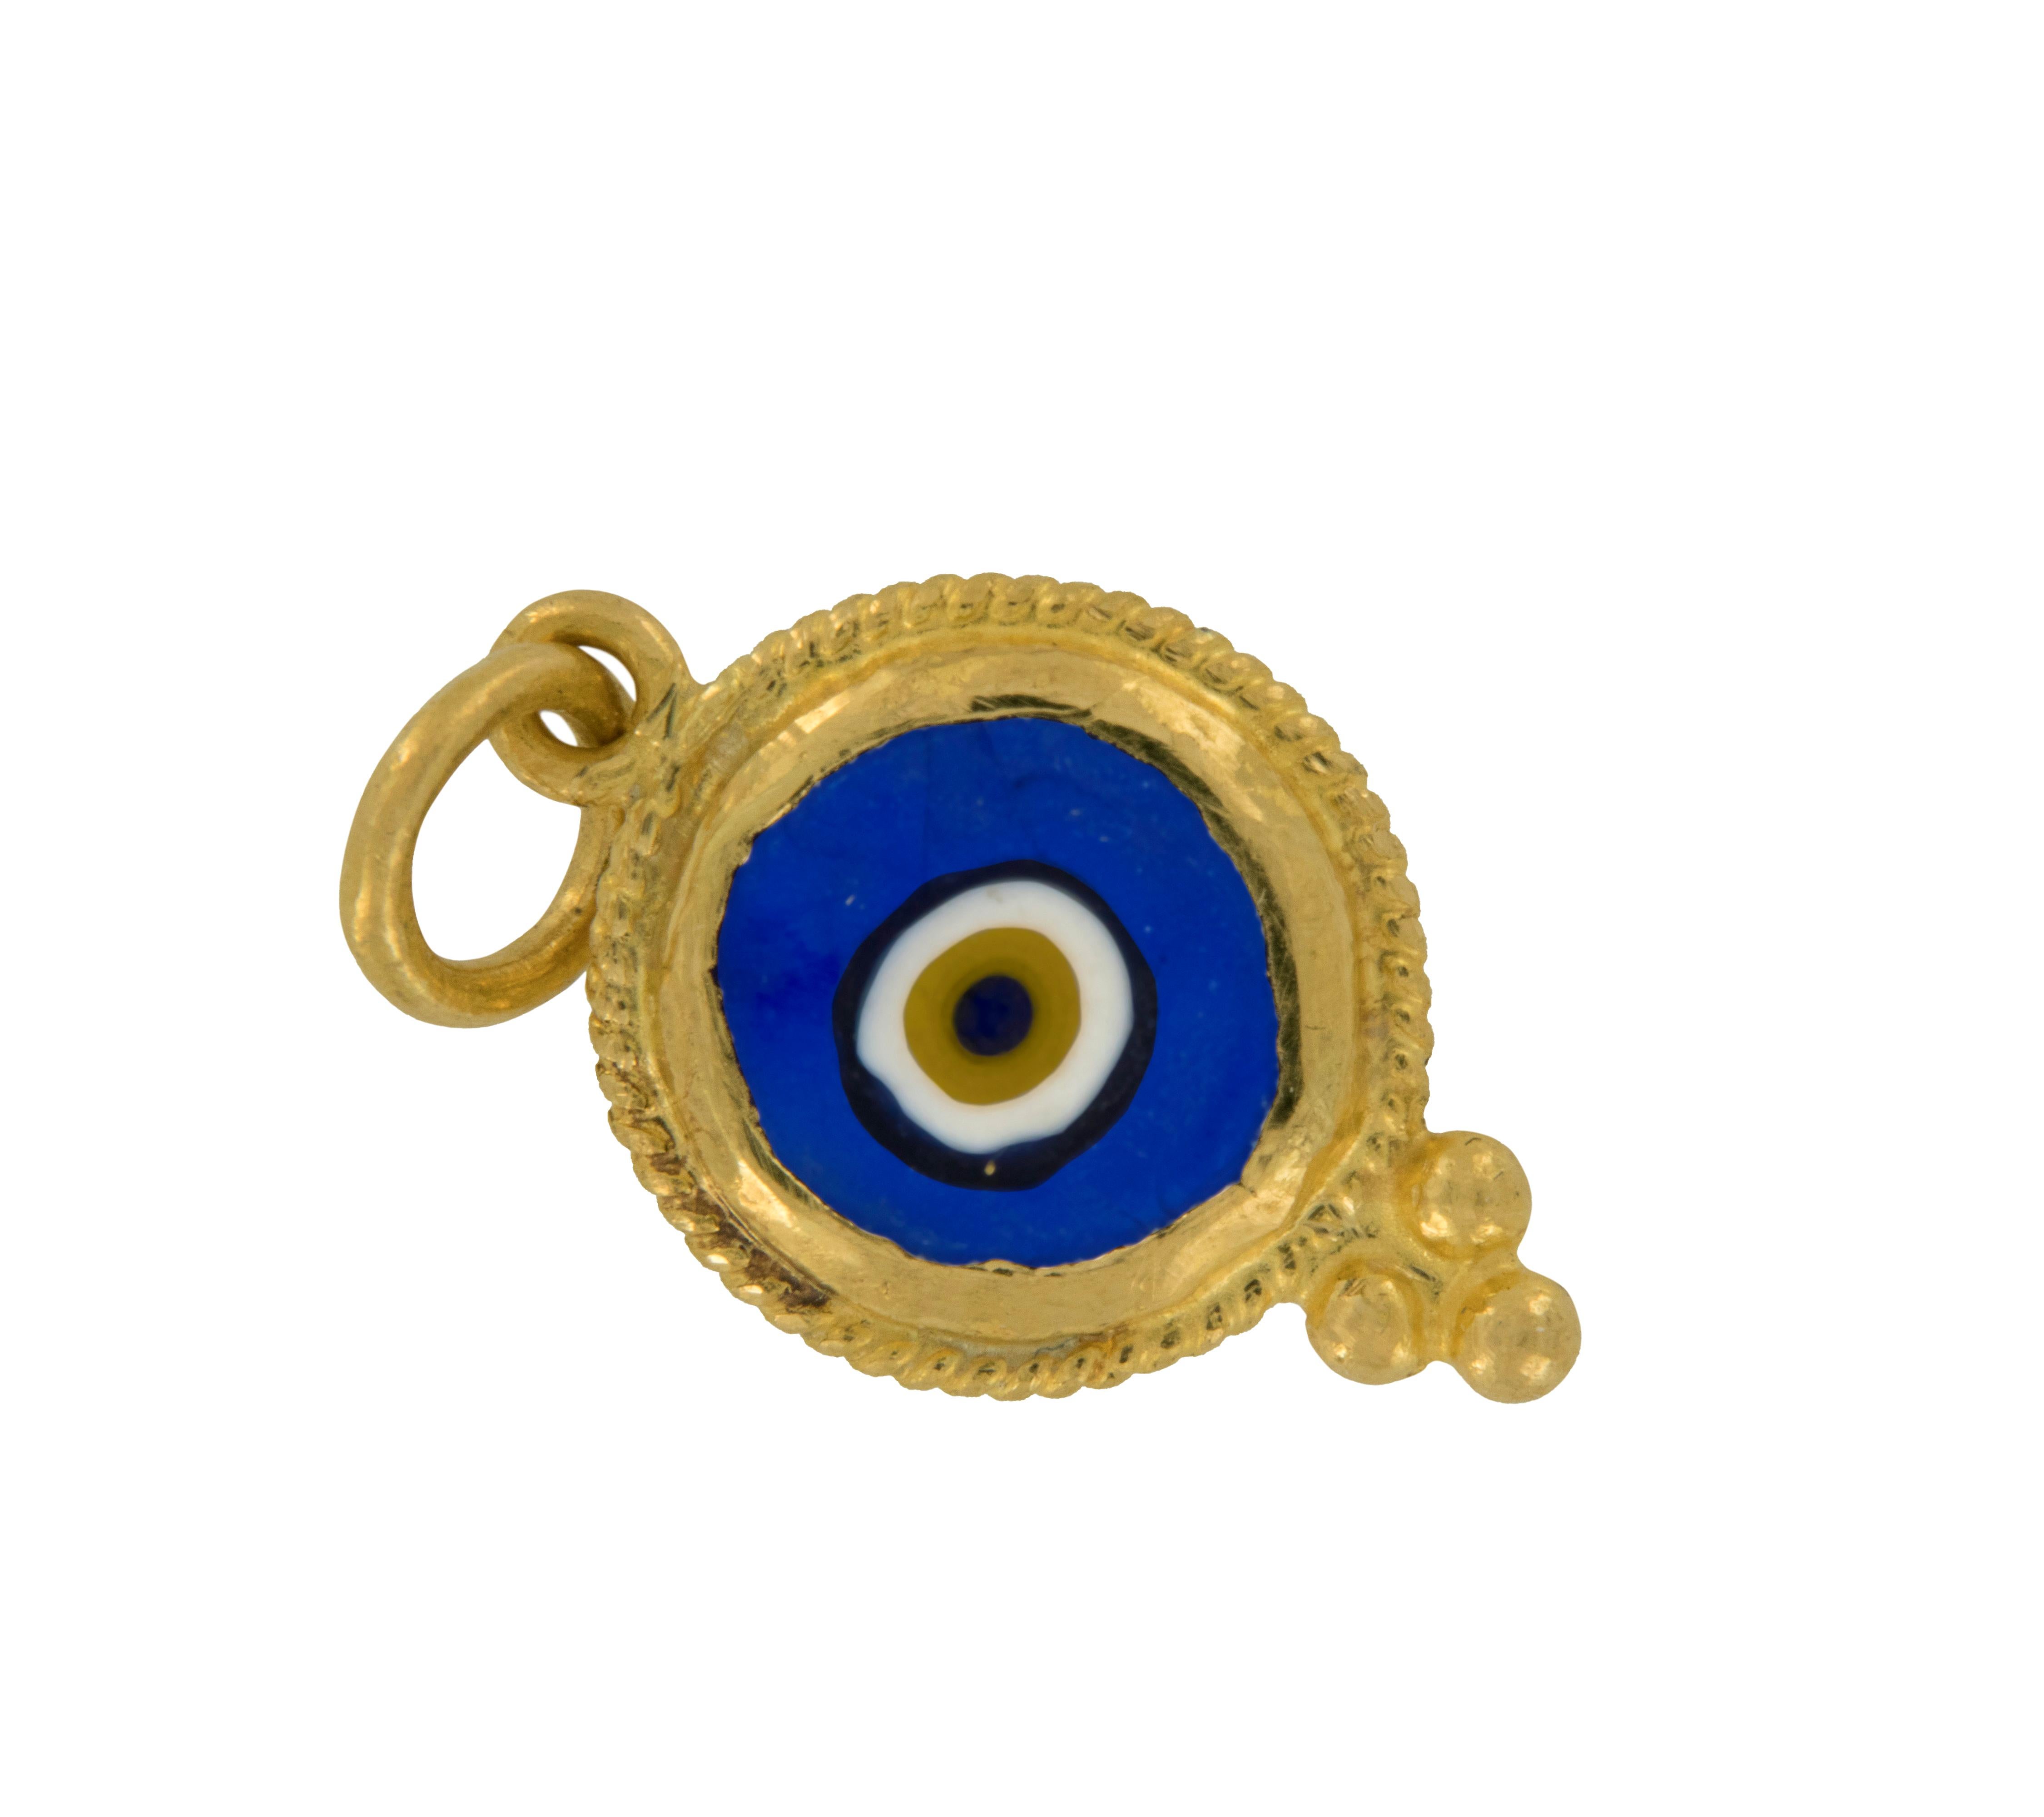 Rarest of all the golds, 24 karat gold is valued by all discerning investors. With it's unmistakable warm yellow color & hammered finish, this evil eye pendant / charm talisman is thought to keep you safe from curses. Blue is the traditional color